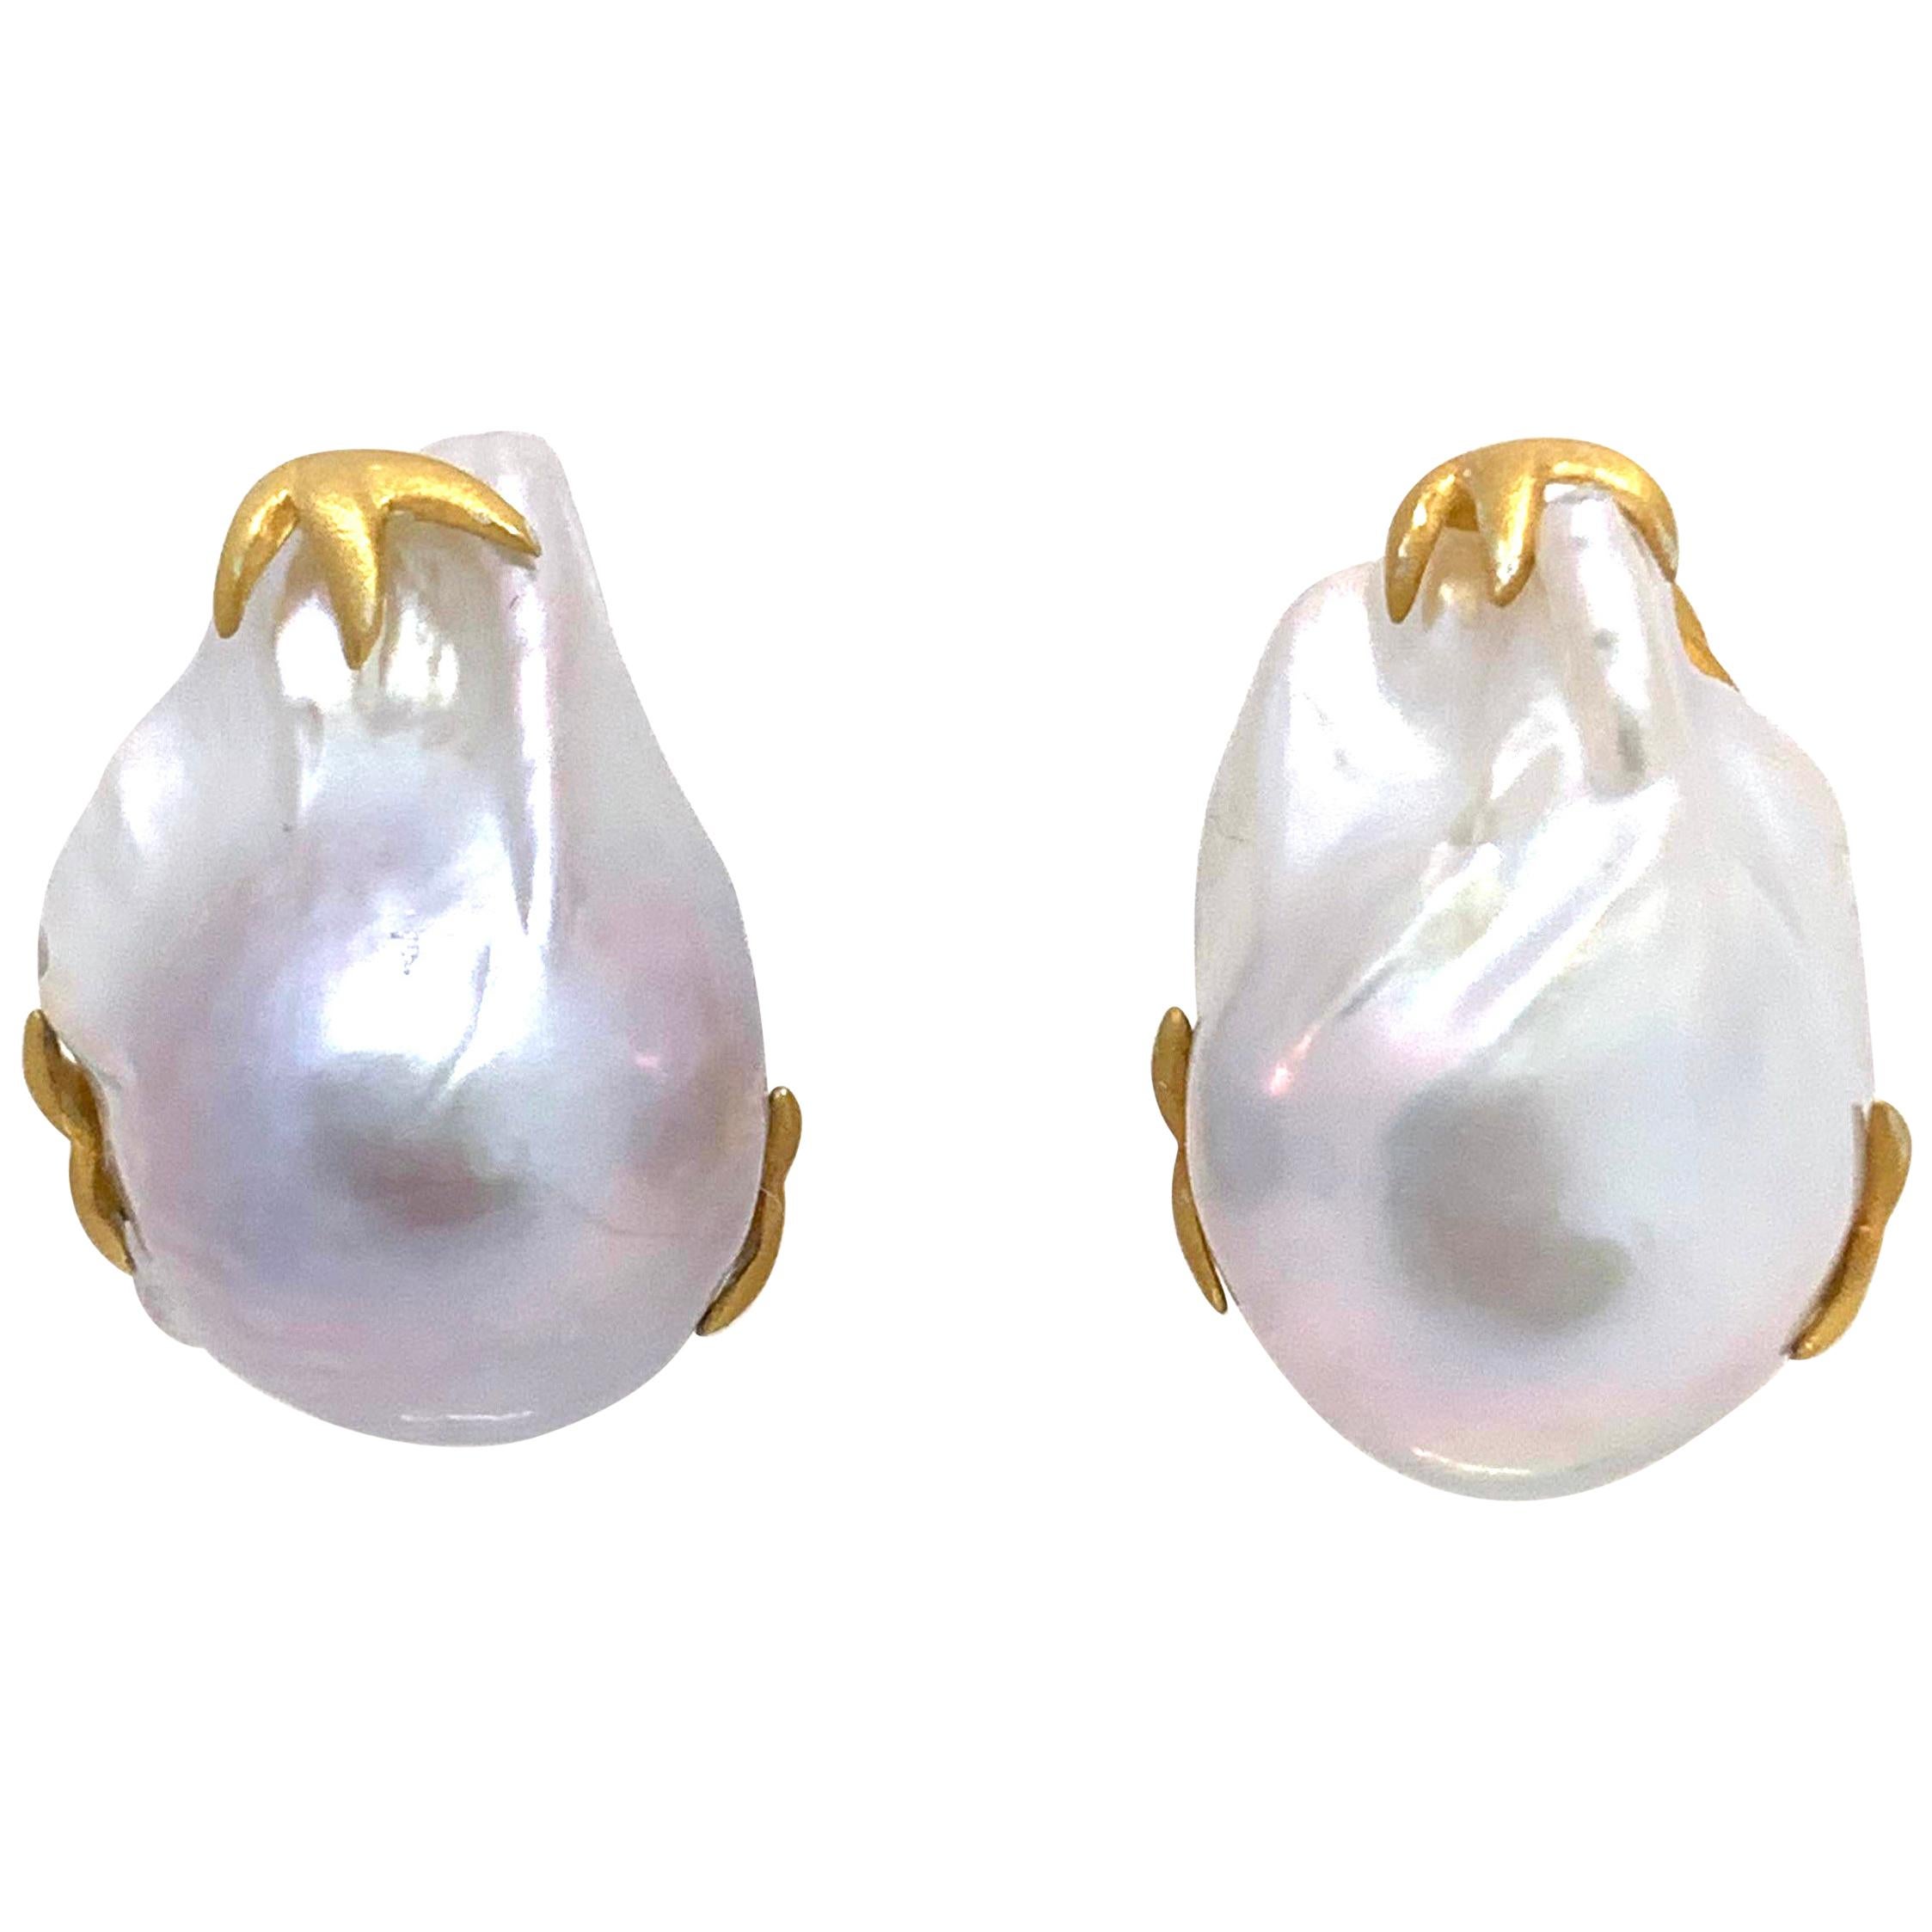 Large Lustrous pair of 16mm Cultured Baroque Pearl Earrings